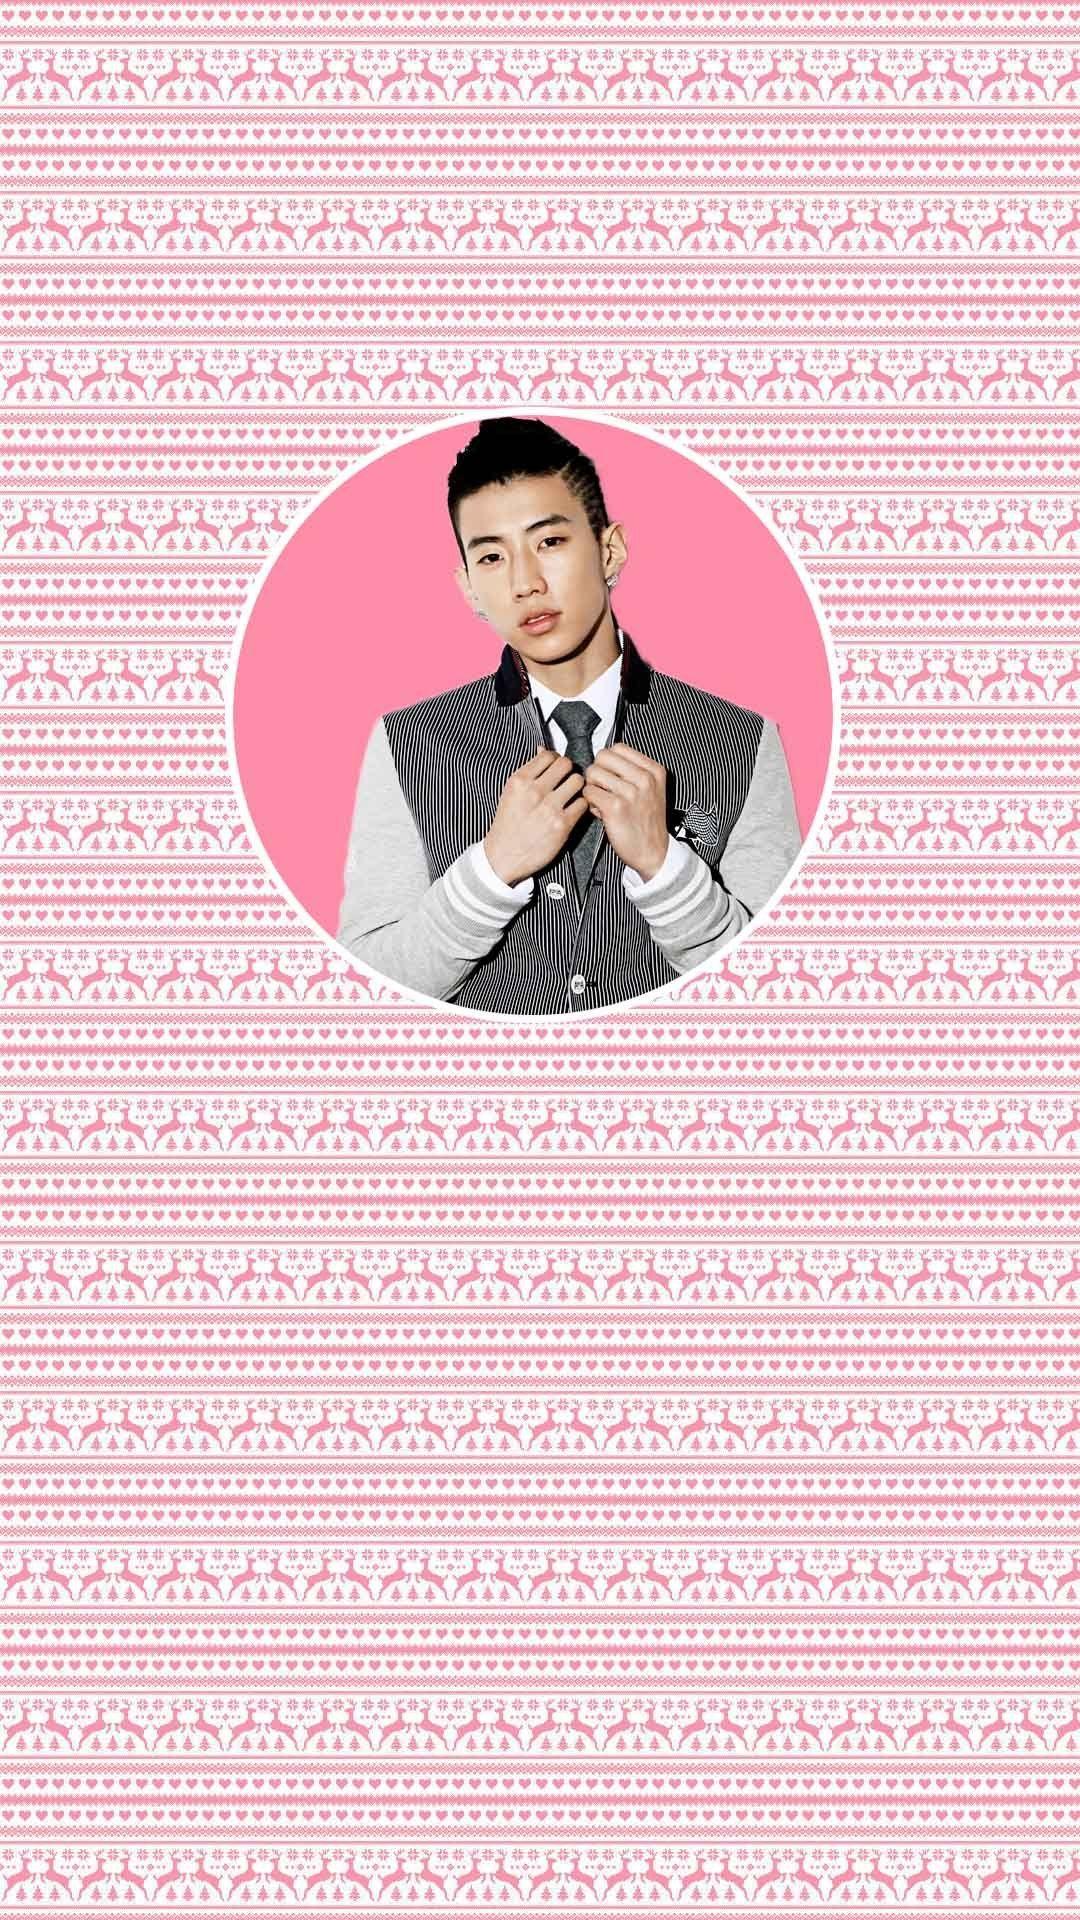 ✧・ﾟ: *✧・ﾟ:*, JAY PARK CHRISTMAS WALLPAPERS 1080x1920px please